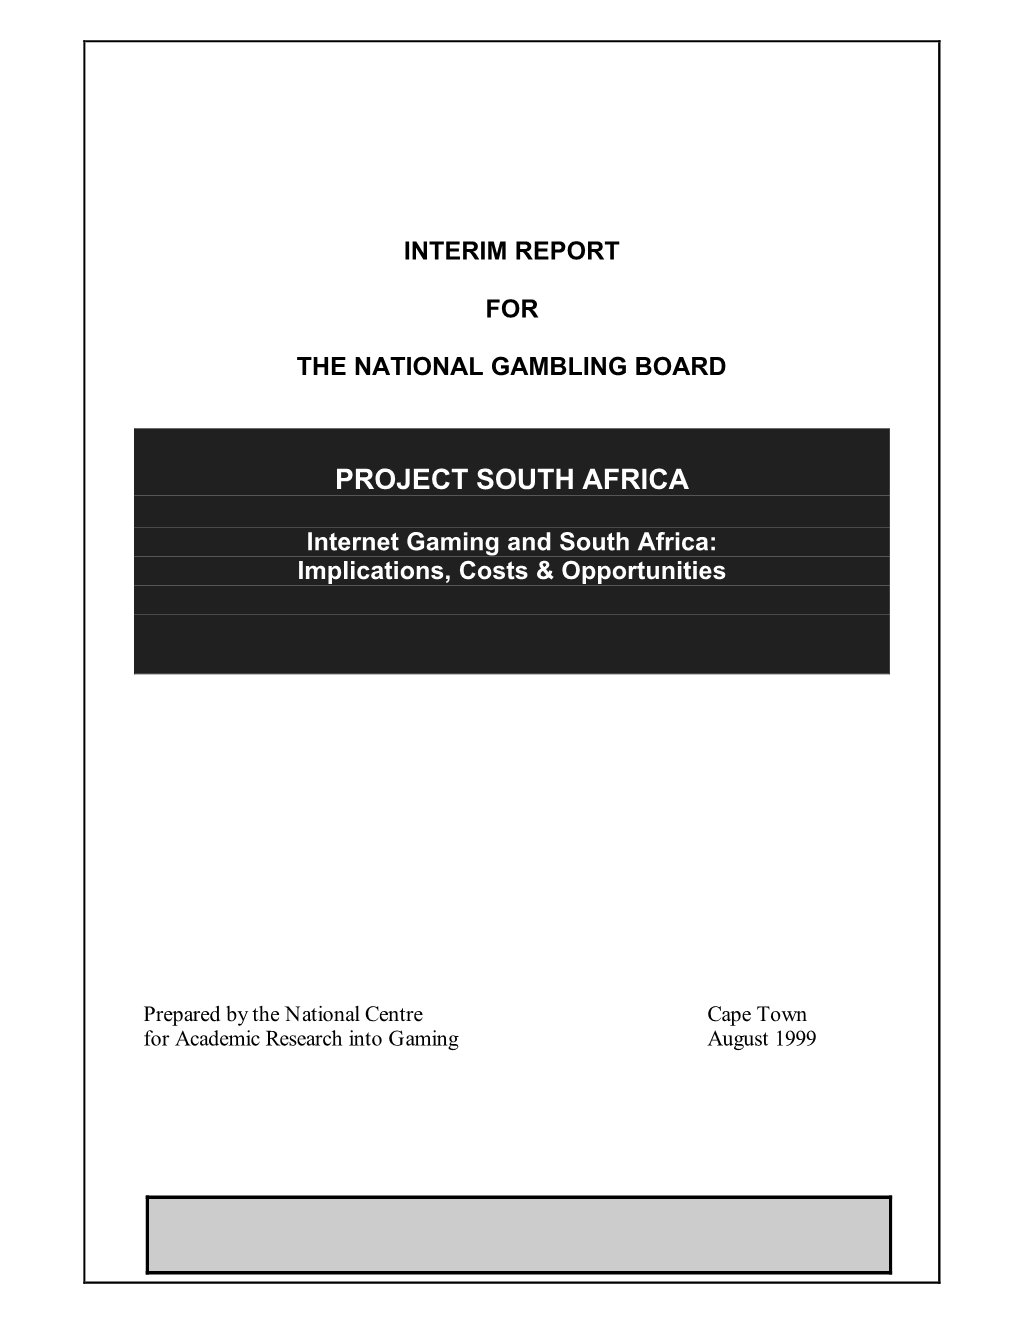 Project South Africa